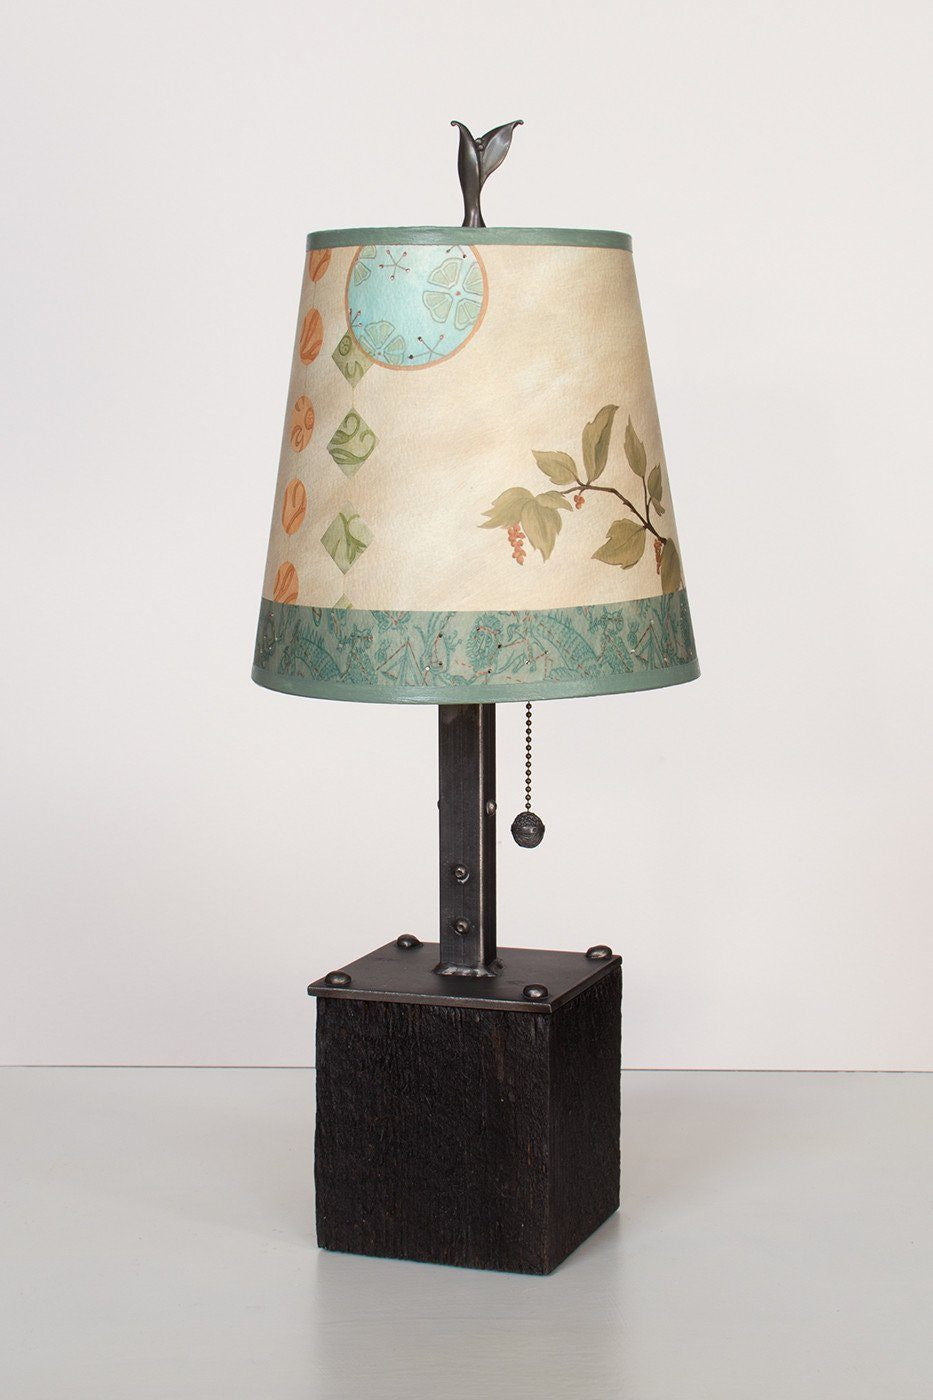 Janna Ugone &amp; Co Table Lamps Steel Table Lamp on Reclaimed Wood with Small Drum Shade in Celestial Leaf